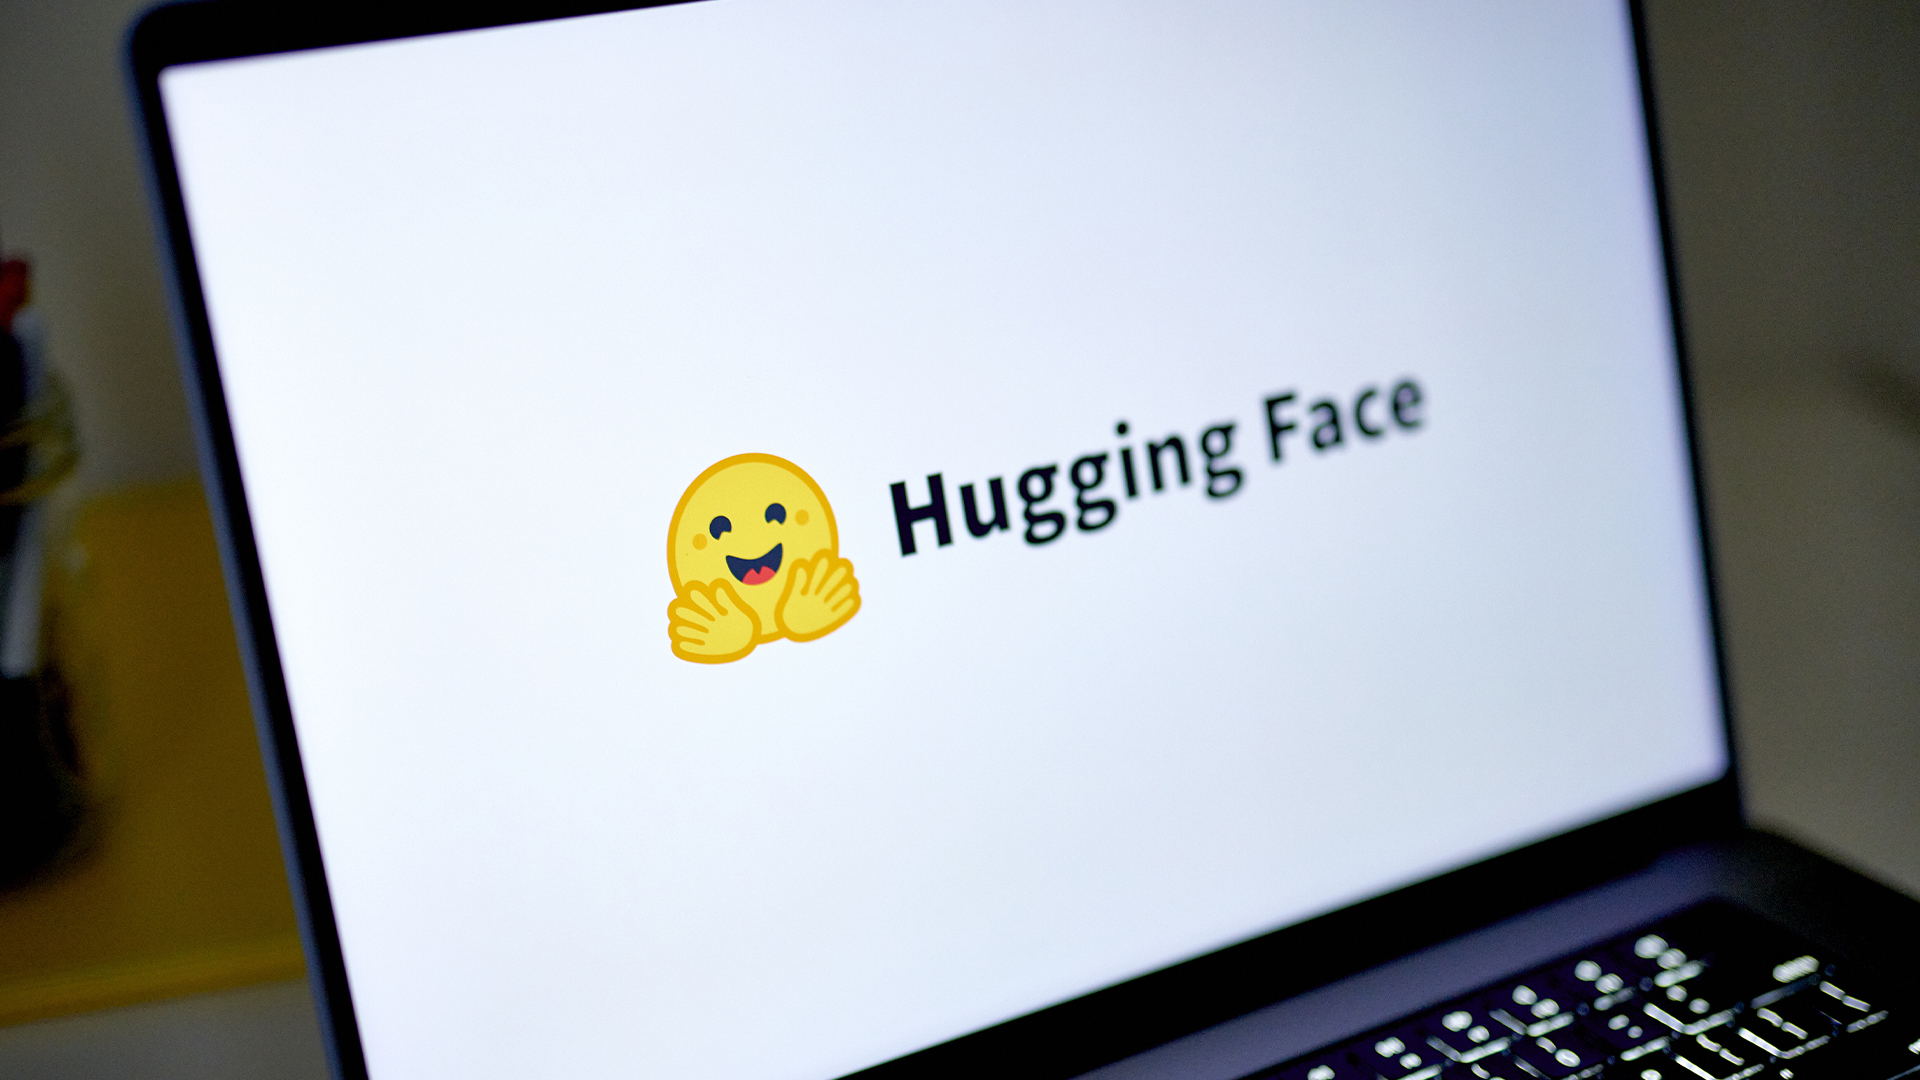 New Hug Face Vulnerability Could Mean Trouble for AI Service Providers